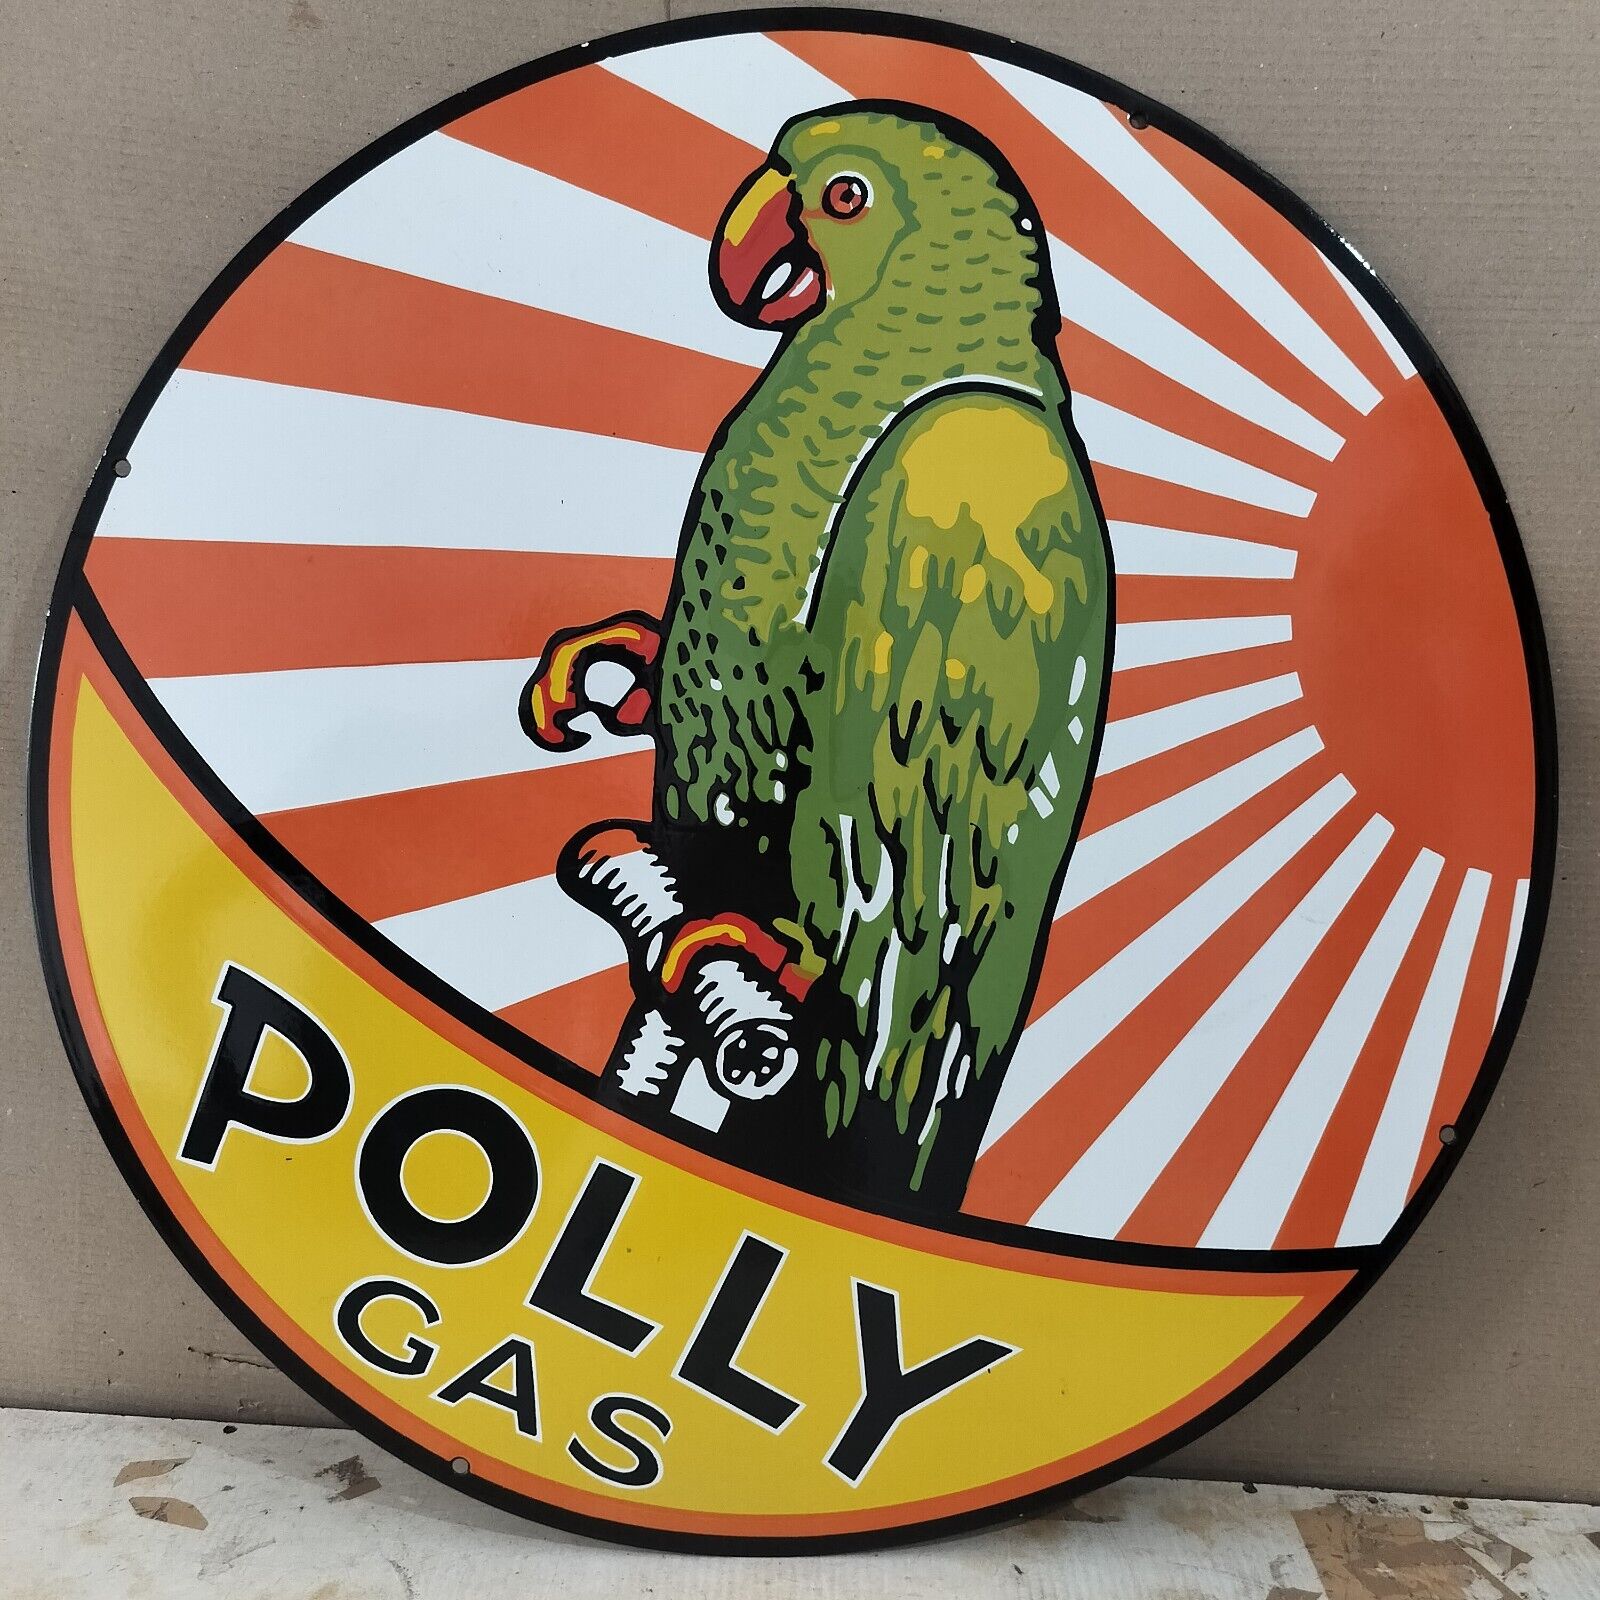 Polly Gas Porcelain Enamel Metal Sign 30 x 30 Inches